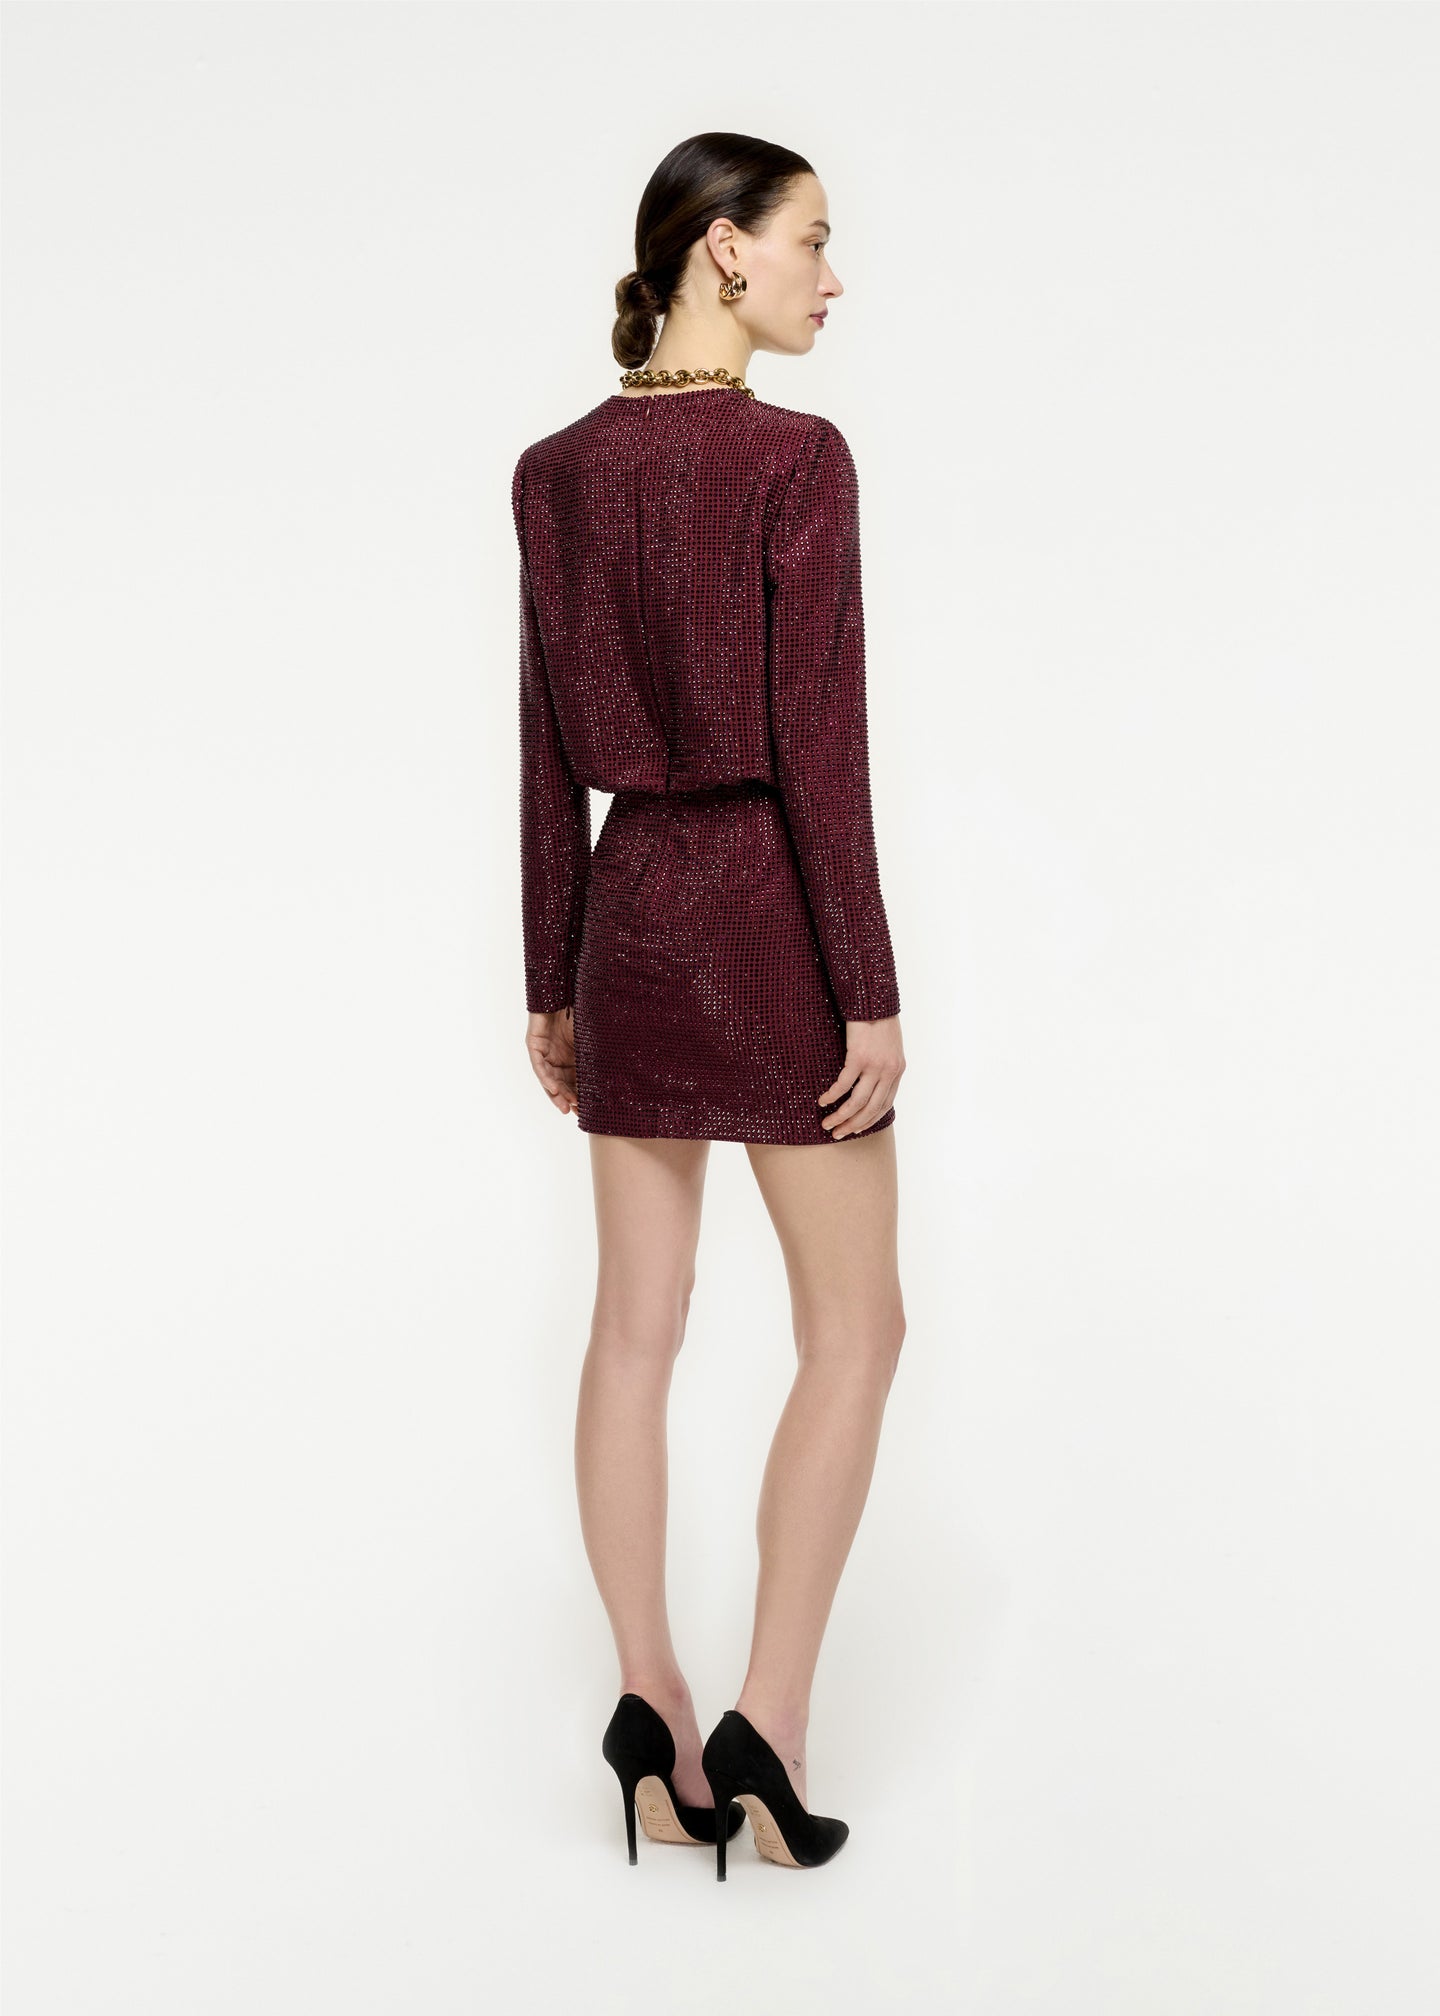 The back of a woman wearing the Long Sleeve Diamante Mini Dress in Maroon